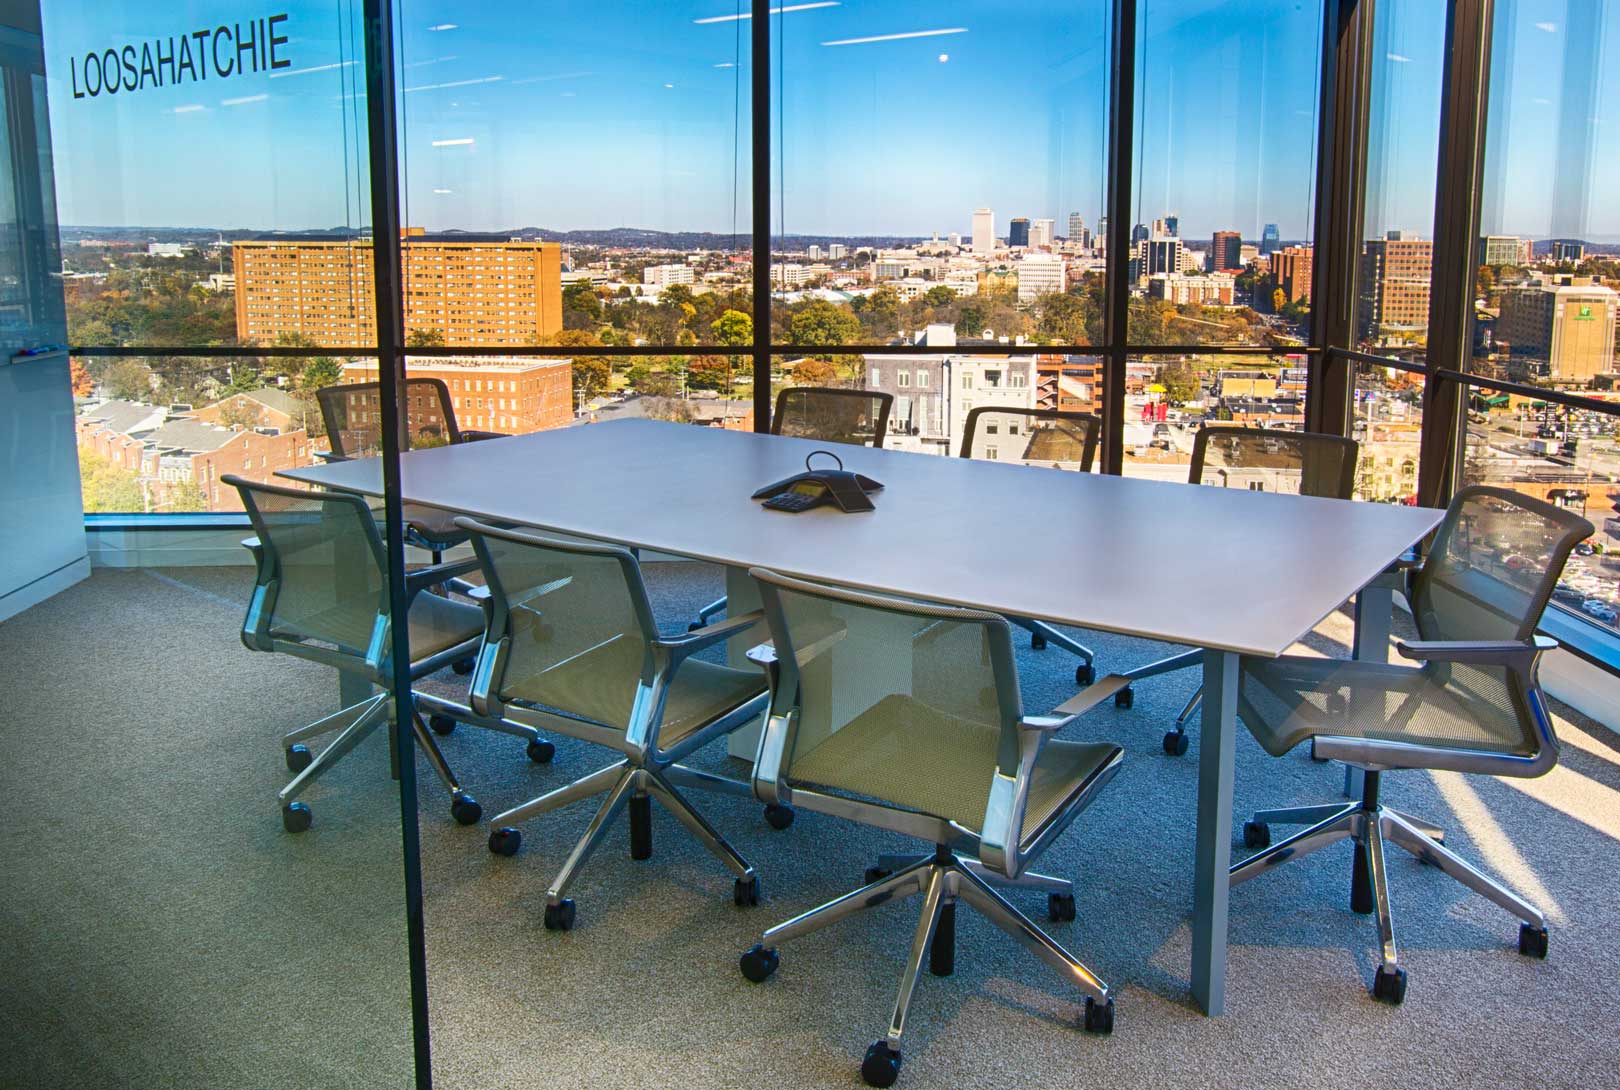 A conference room with a view of the city of Nashville.